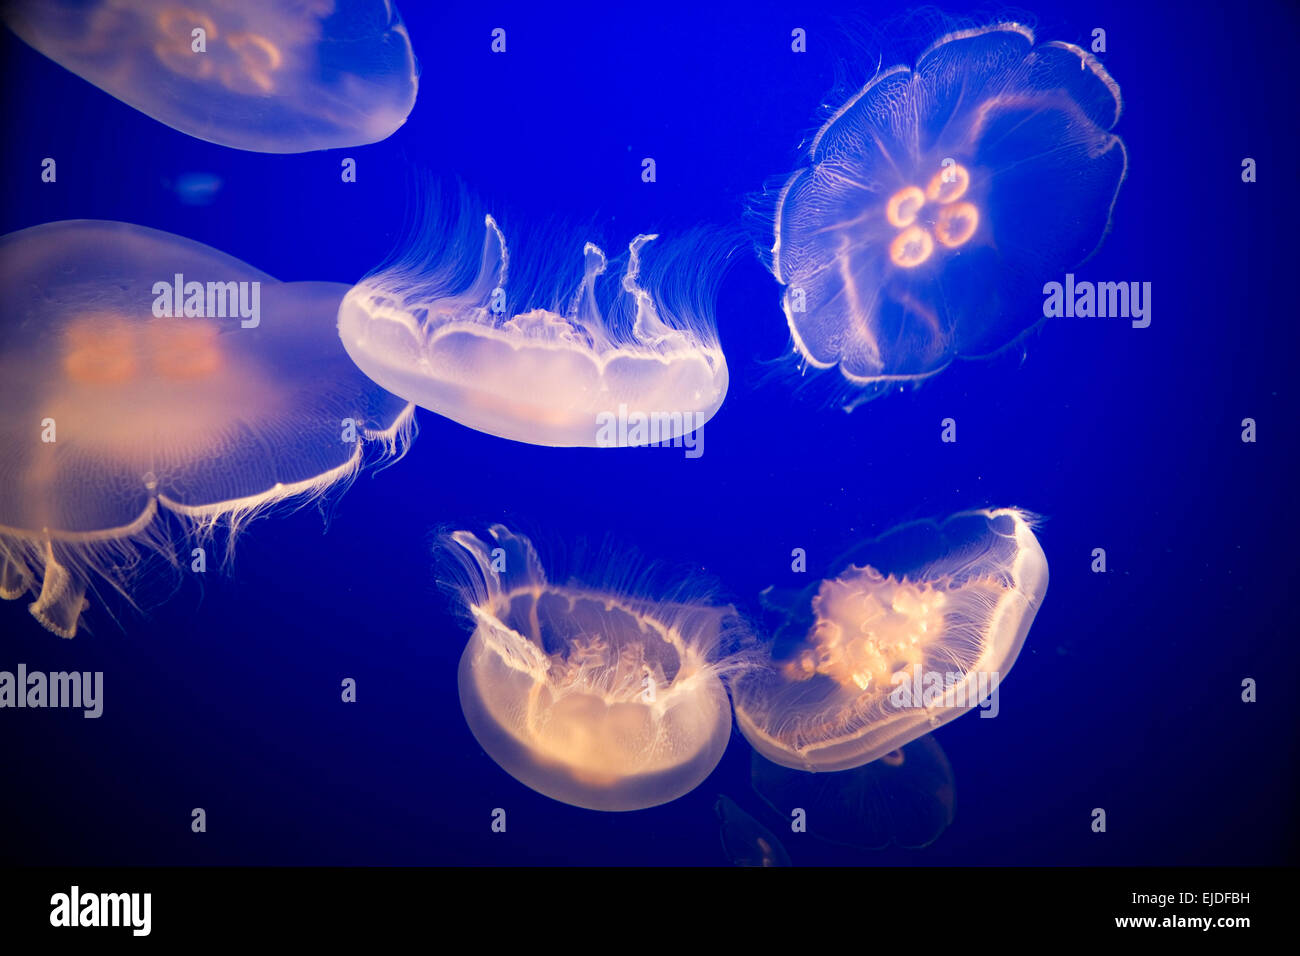 A small group of jellyfish floating in water delicate and translucent marine life. Stock Photo